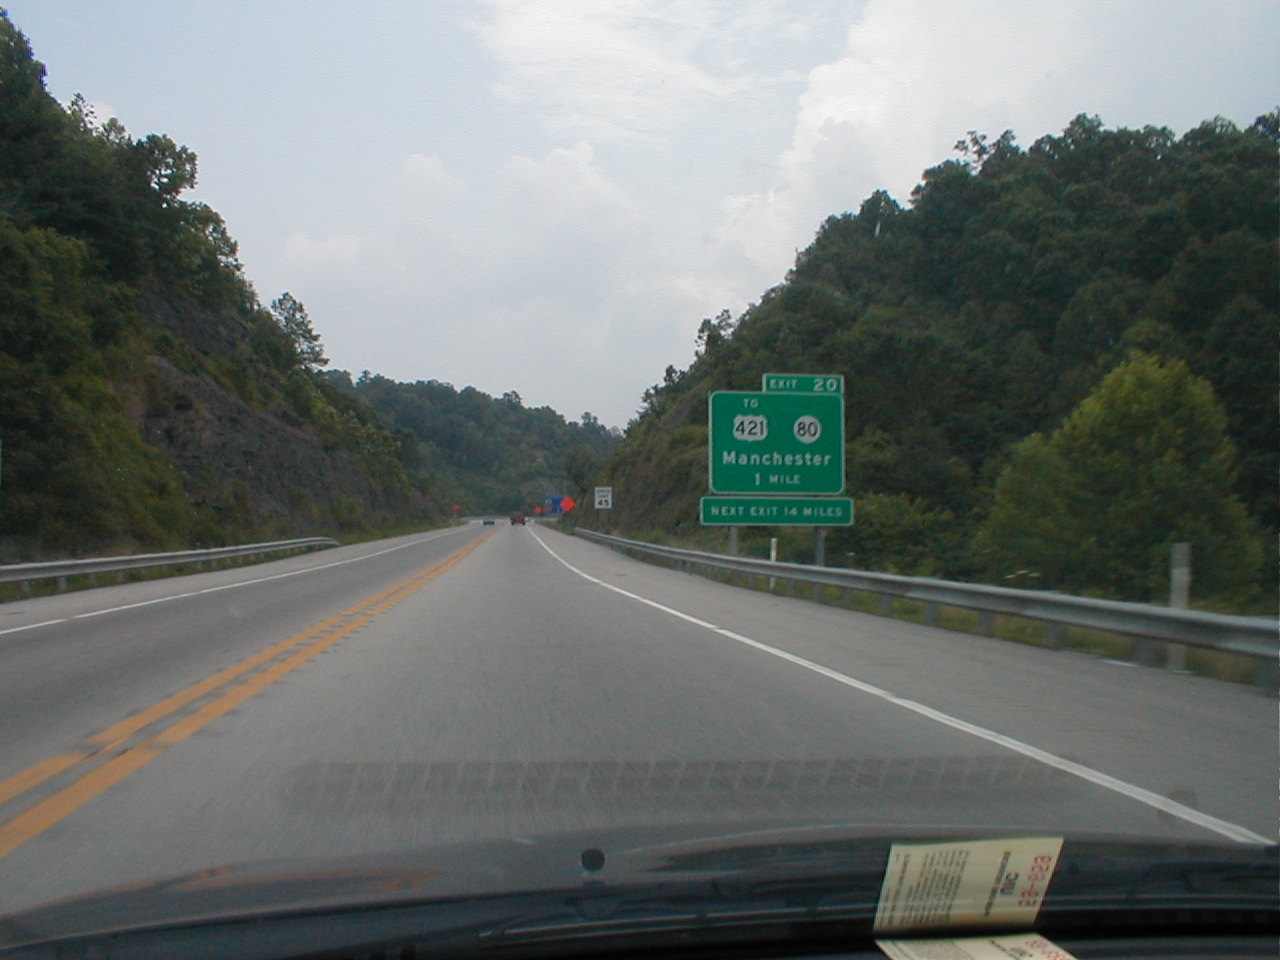 Approaching Exit 20